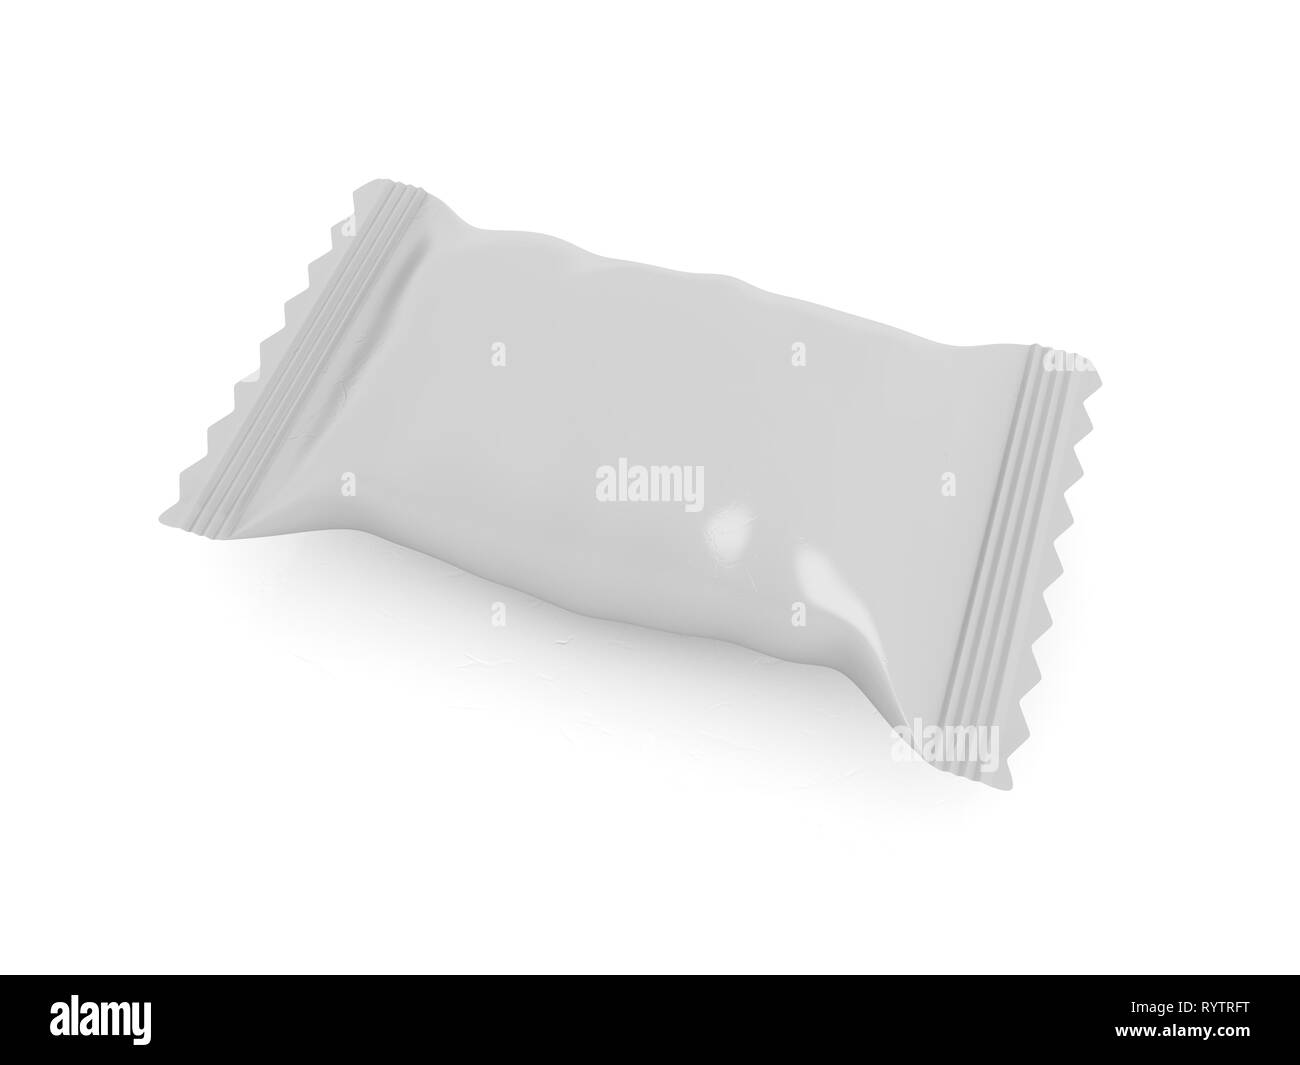 Download Candy Packaging Mockup 3d Rendering Isolated Stock Photo Alamy